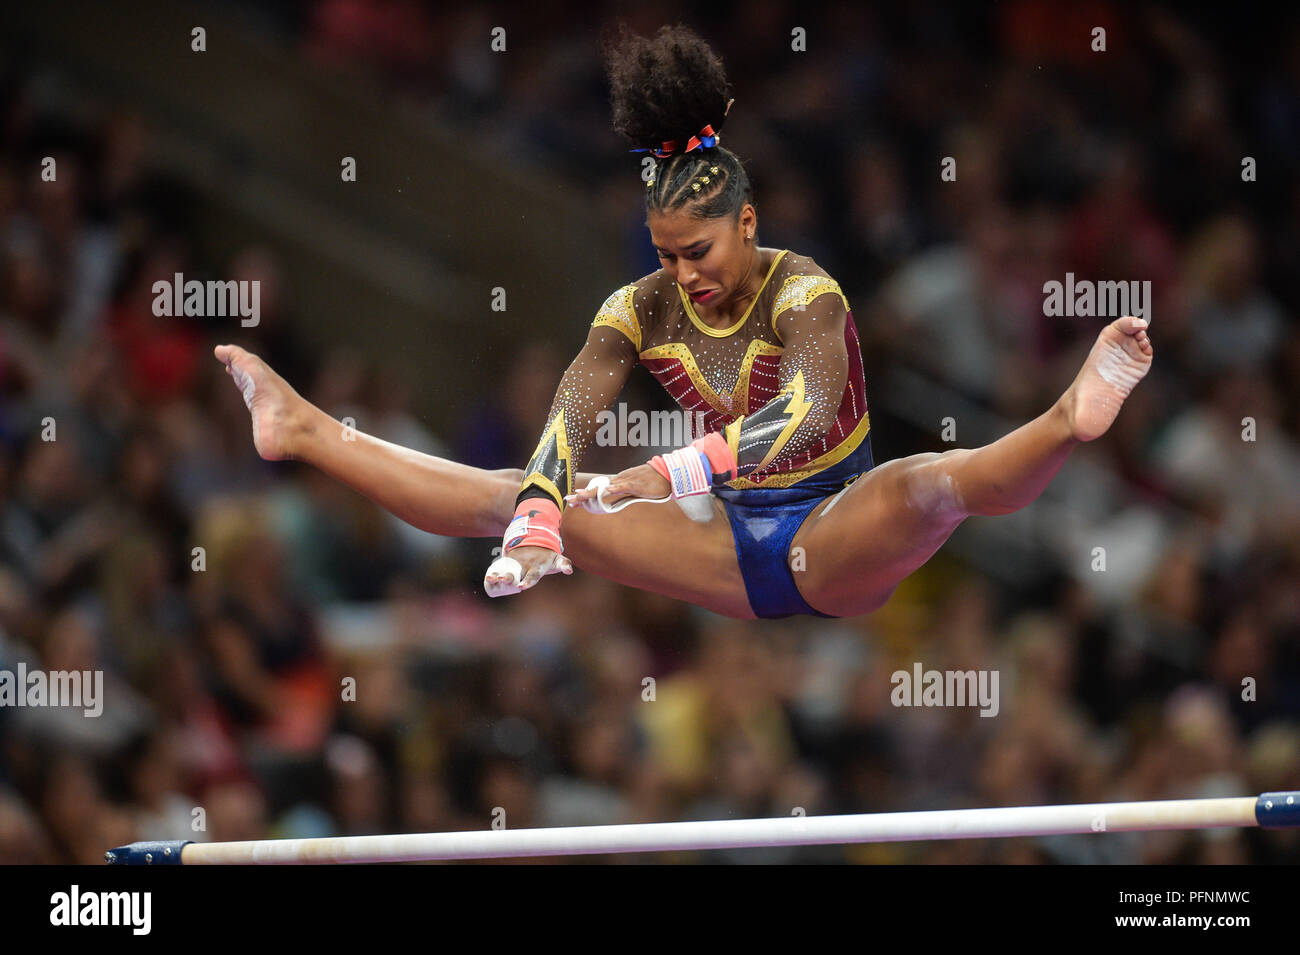 August 19, 2018 - Boston, Massachussetts, U.S - JORDAN CHILES competes on the uneven bars while wearing a superwoman inspired leotard during the final night of competition held at TD Garden in Boston, Massachusetts. (Credit Image: © Amy Sanderson via ZUMA Wire) Stock Photo